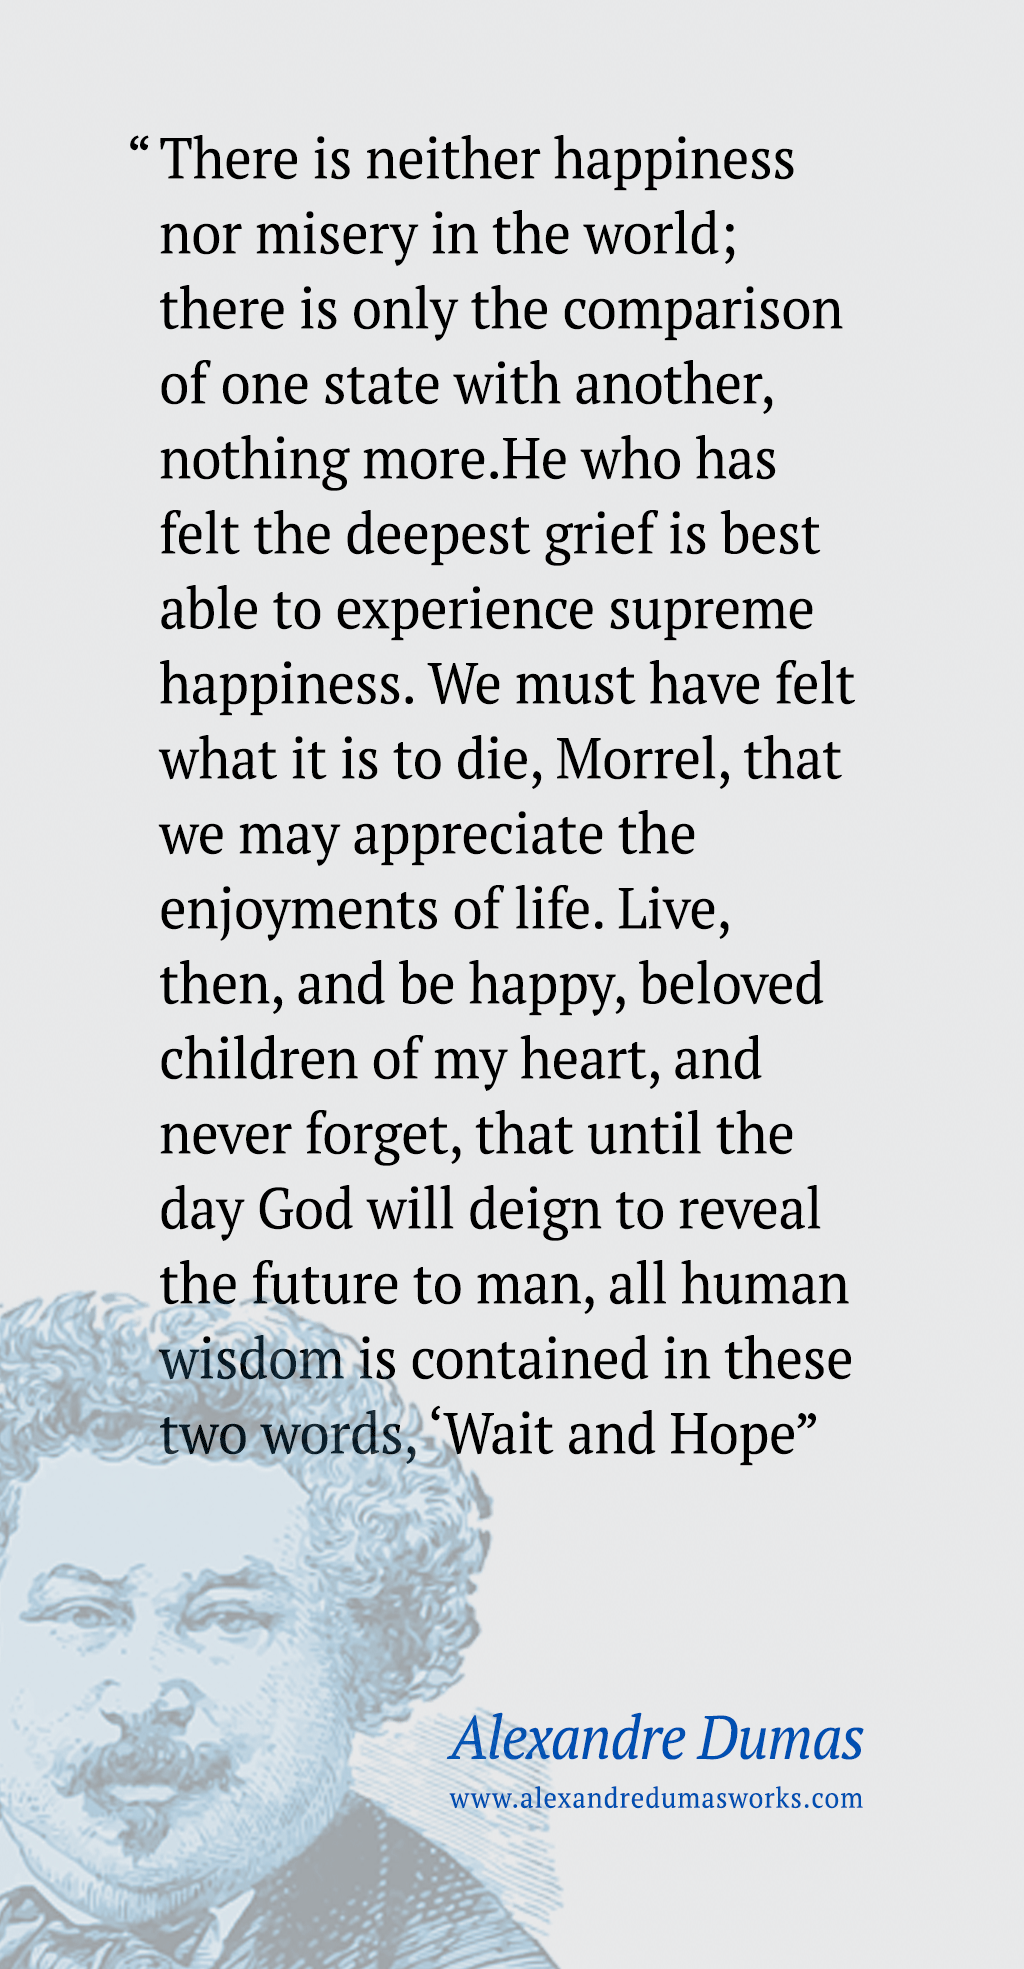 “There is neither happiness nor misery in the world; ..." - Alexandre Dumas